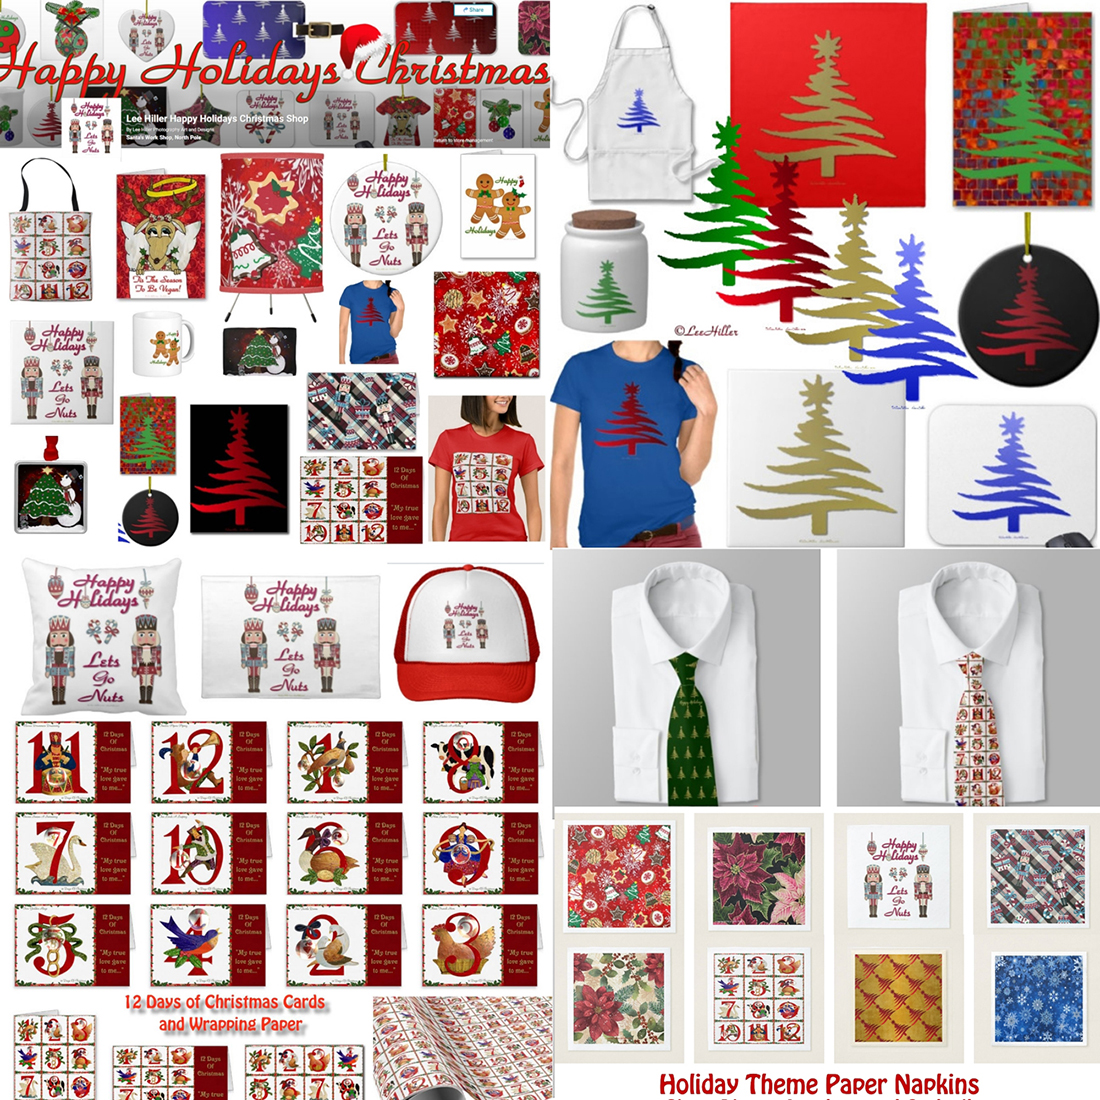 🌟🎄🎁🎄🎁🎄🌟
The #HappyHolidays Shop is Always Open!
#Christmas #12DaysOfChristmas #ChristmasTree #snowflake #Nutcracker #poinsettia #Gingerbread #holidaycheer #Christmas2023 #holidaydecor #gifts #giftideas #homedecor #scapbooking #crafting

bitly.com/ZHolidayShop